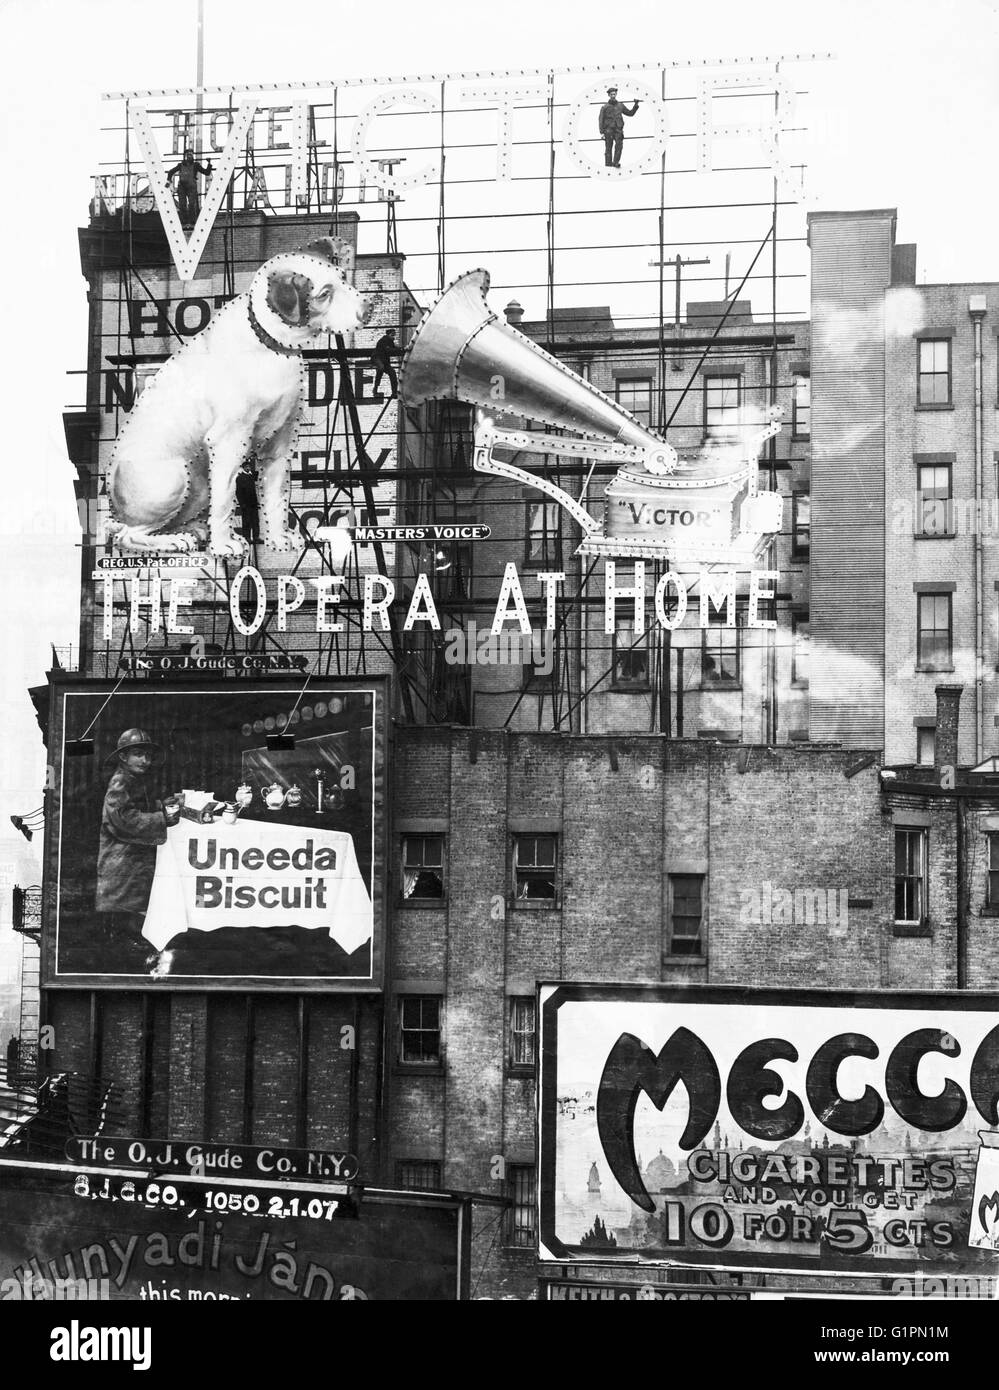 NEW YORK CITY: SIGNS, c1899.  Advertisements and billboards, possibly in Times Square, New York City. Photograph, c1899. Stock Photo